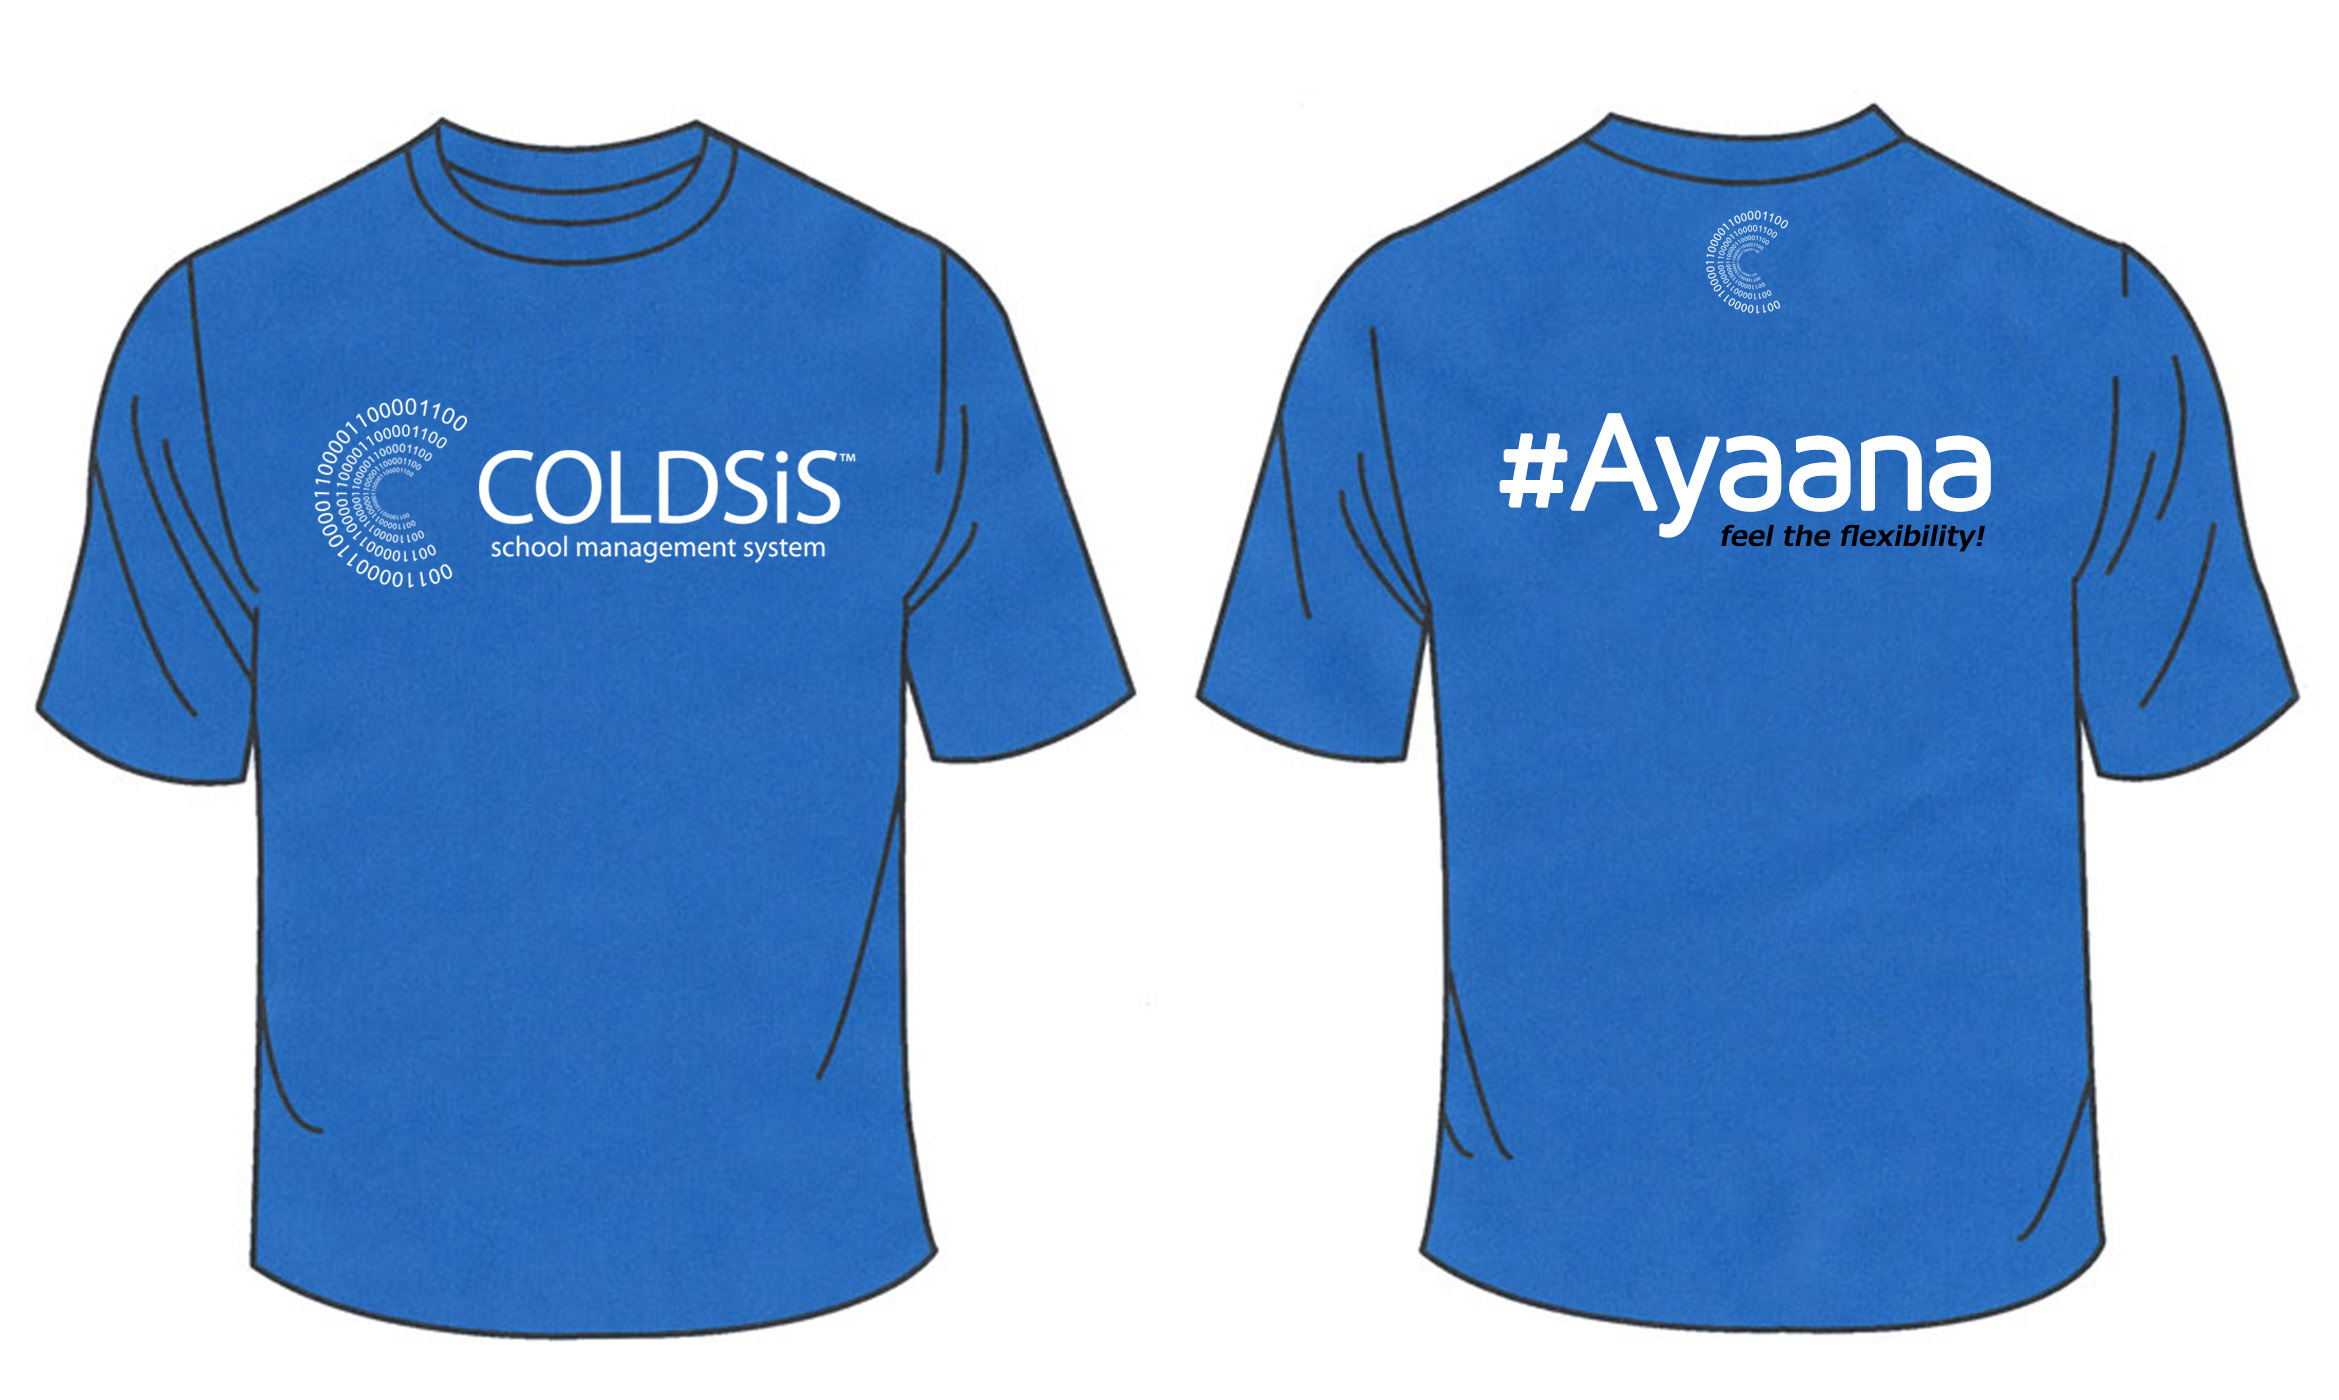 COLDSiS™ Ayaana is here 